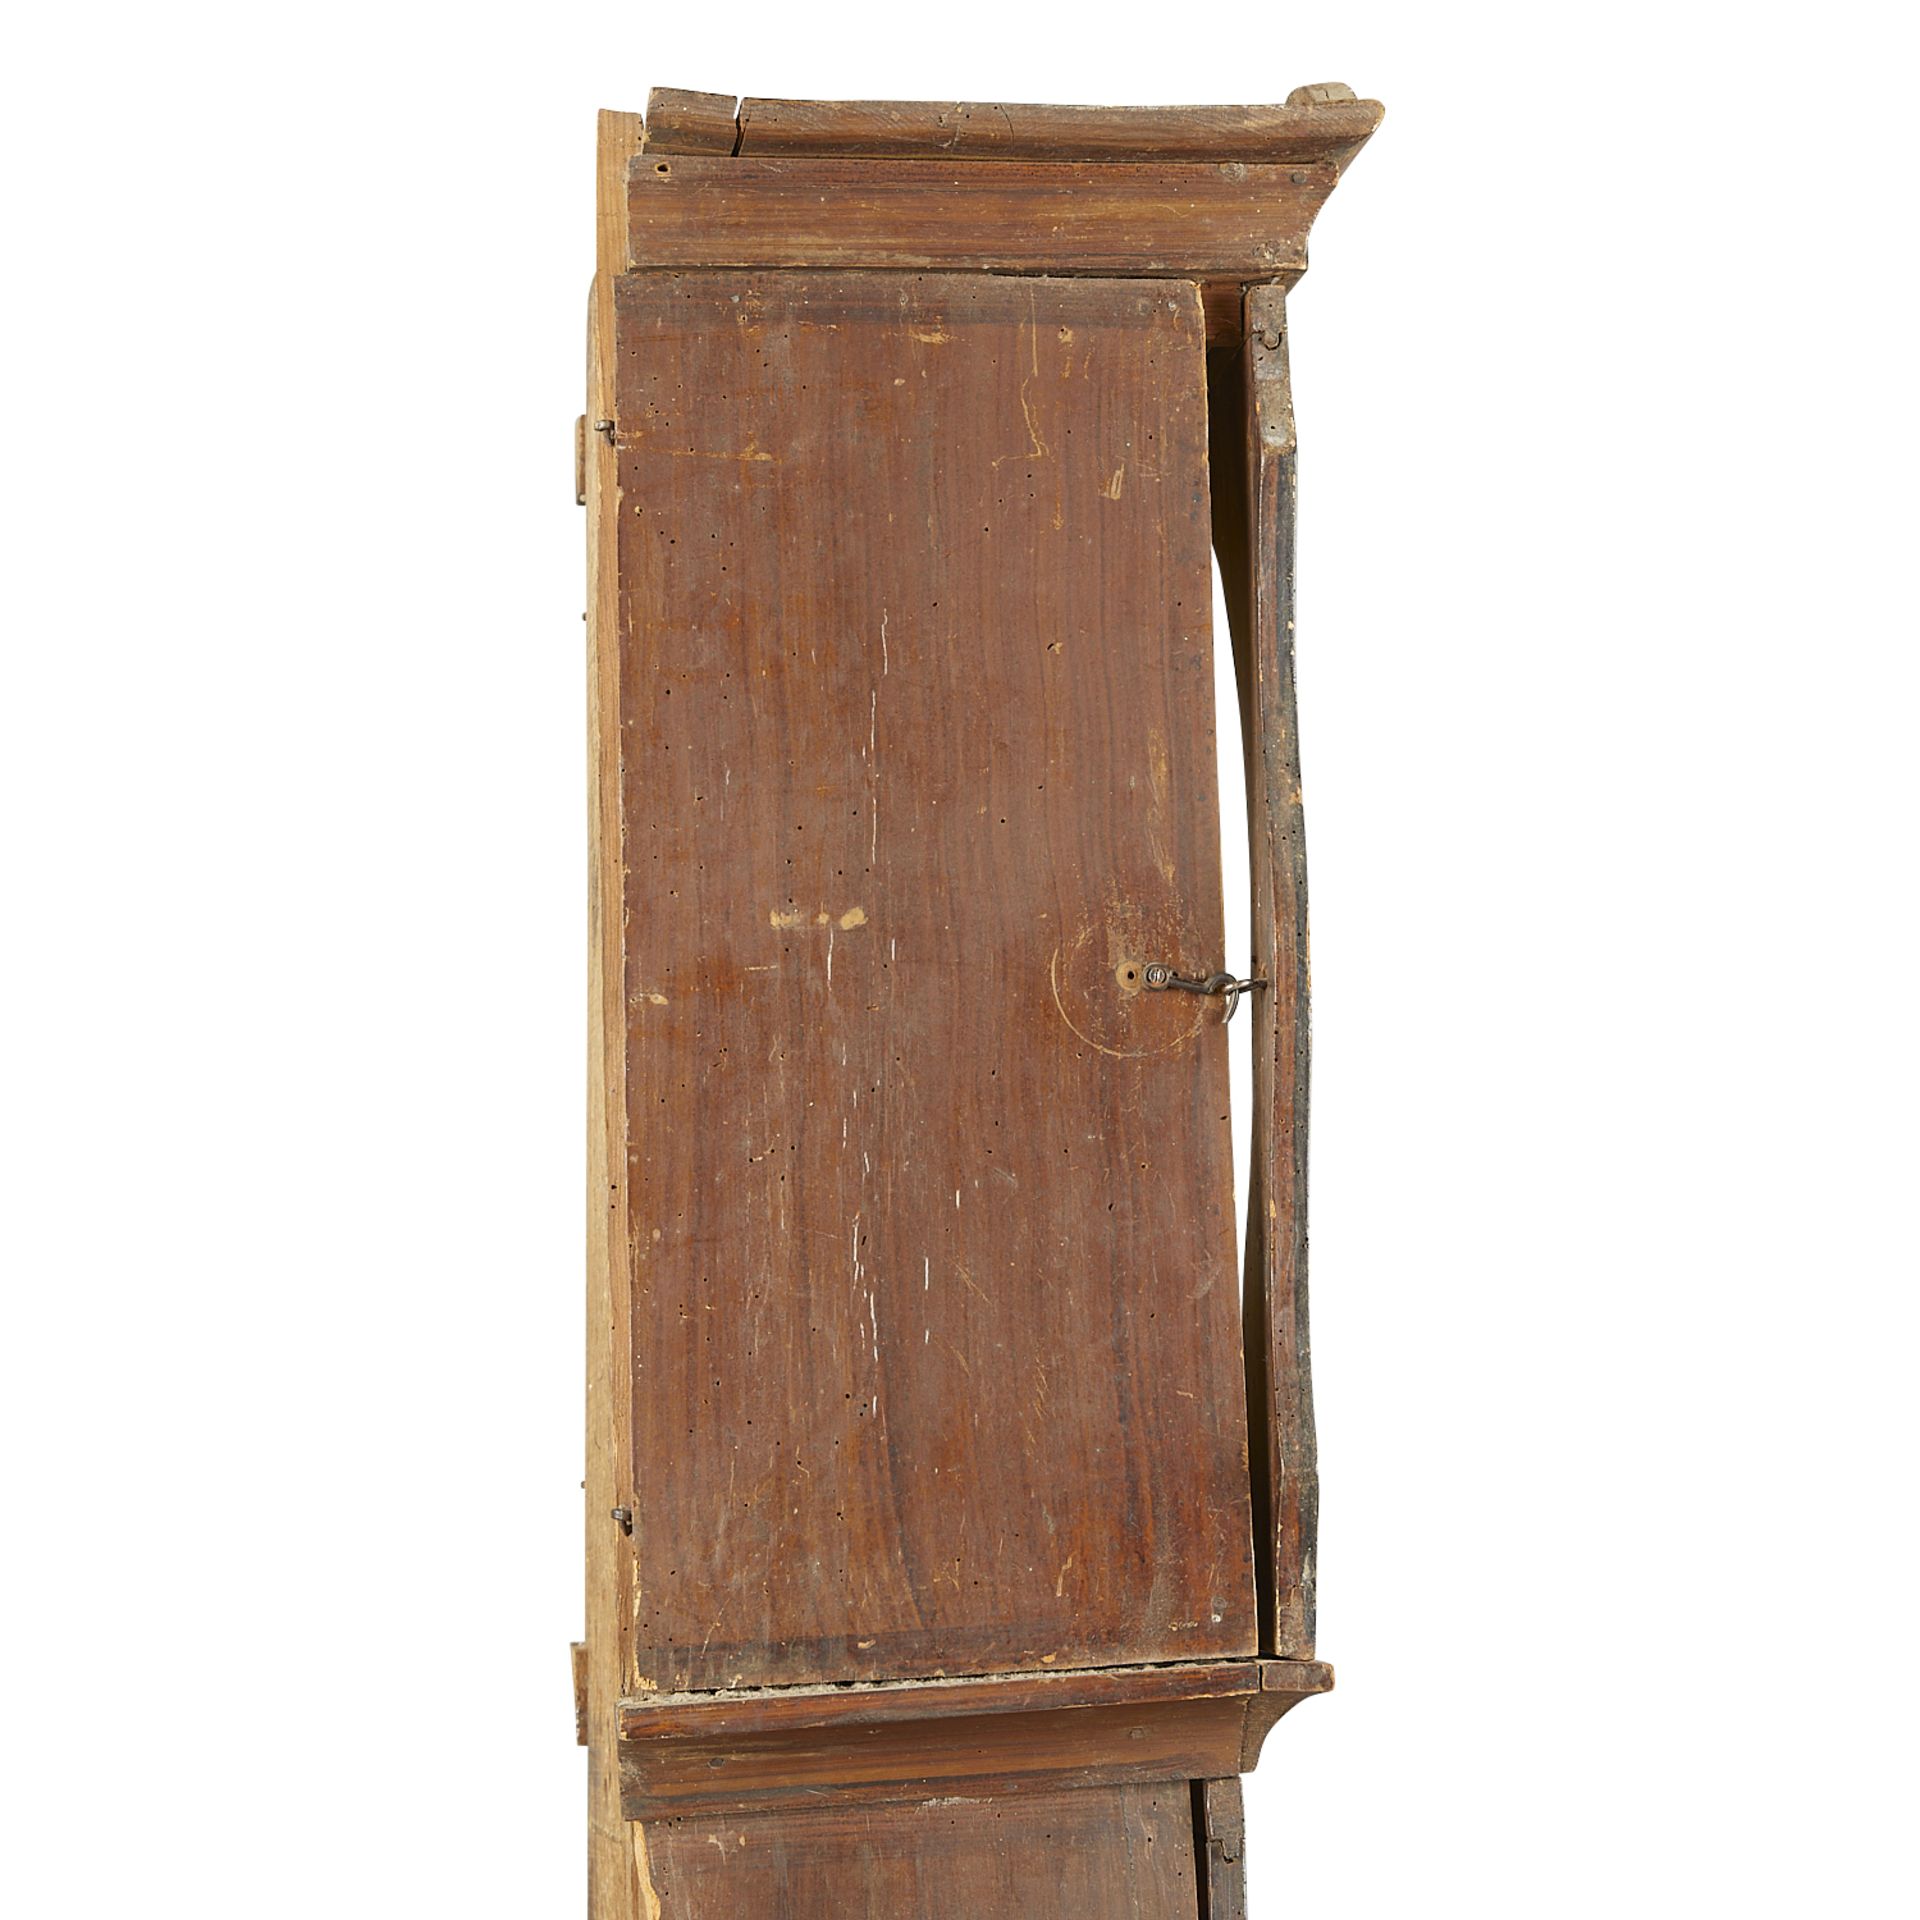 Delarue French Country Painted Grandfather Clock - Image 18 of 22